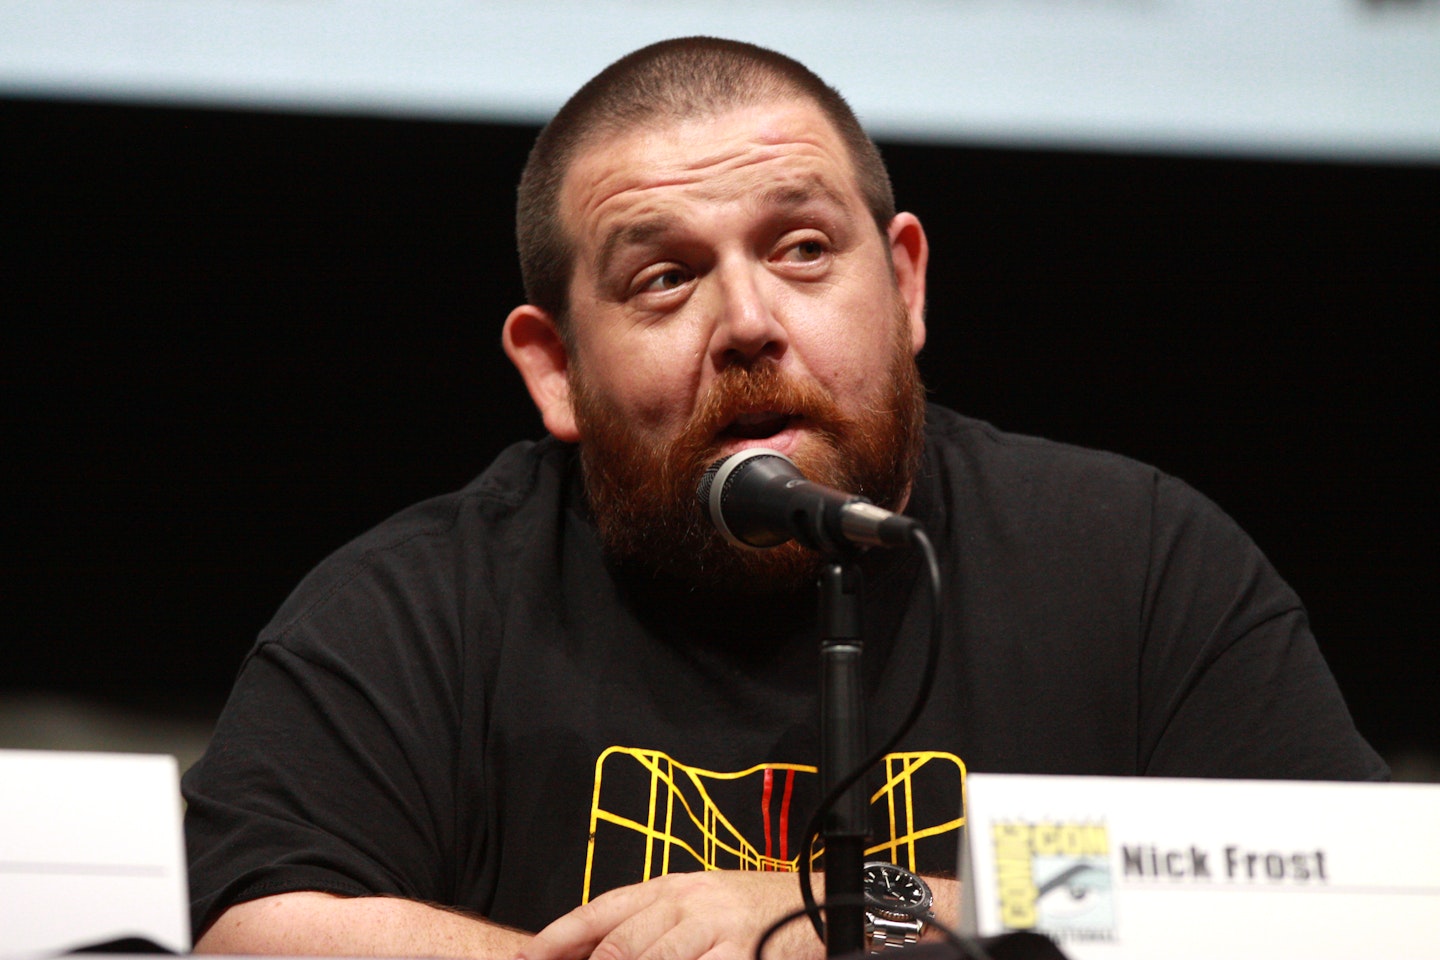 Nick Frost Off On A Business Trip